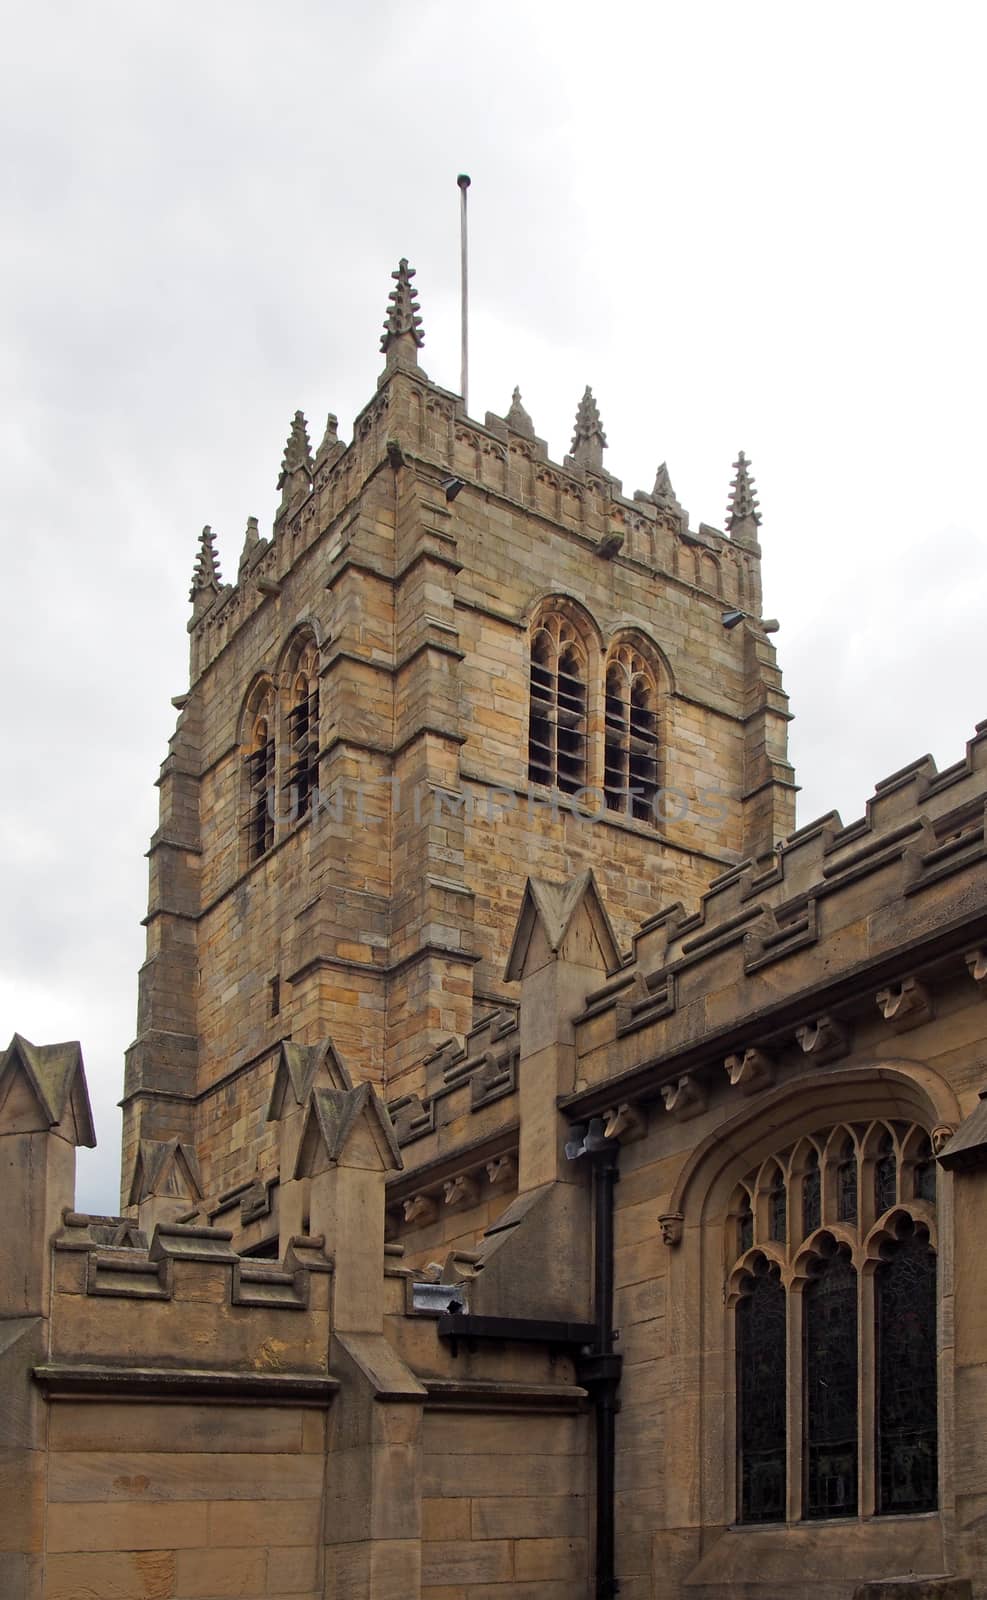 a view of the medieval church of bradford cathedral in west yorkshire the tower and decorative stonework